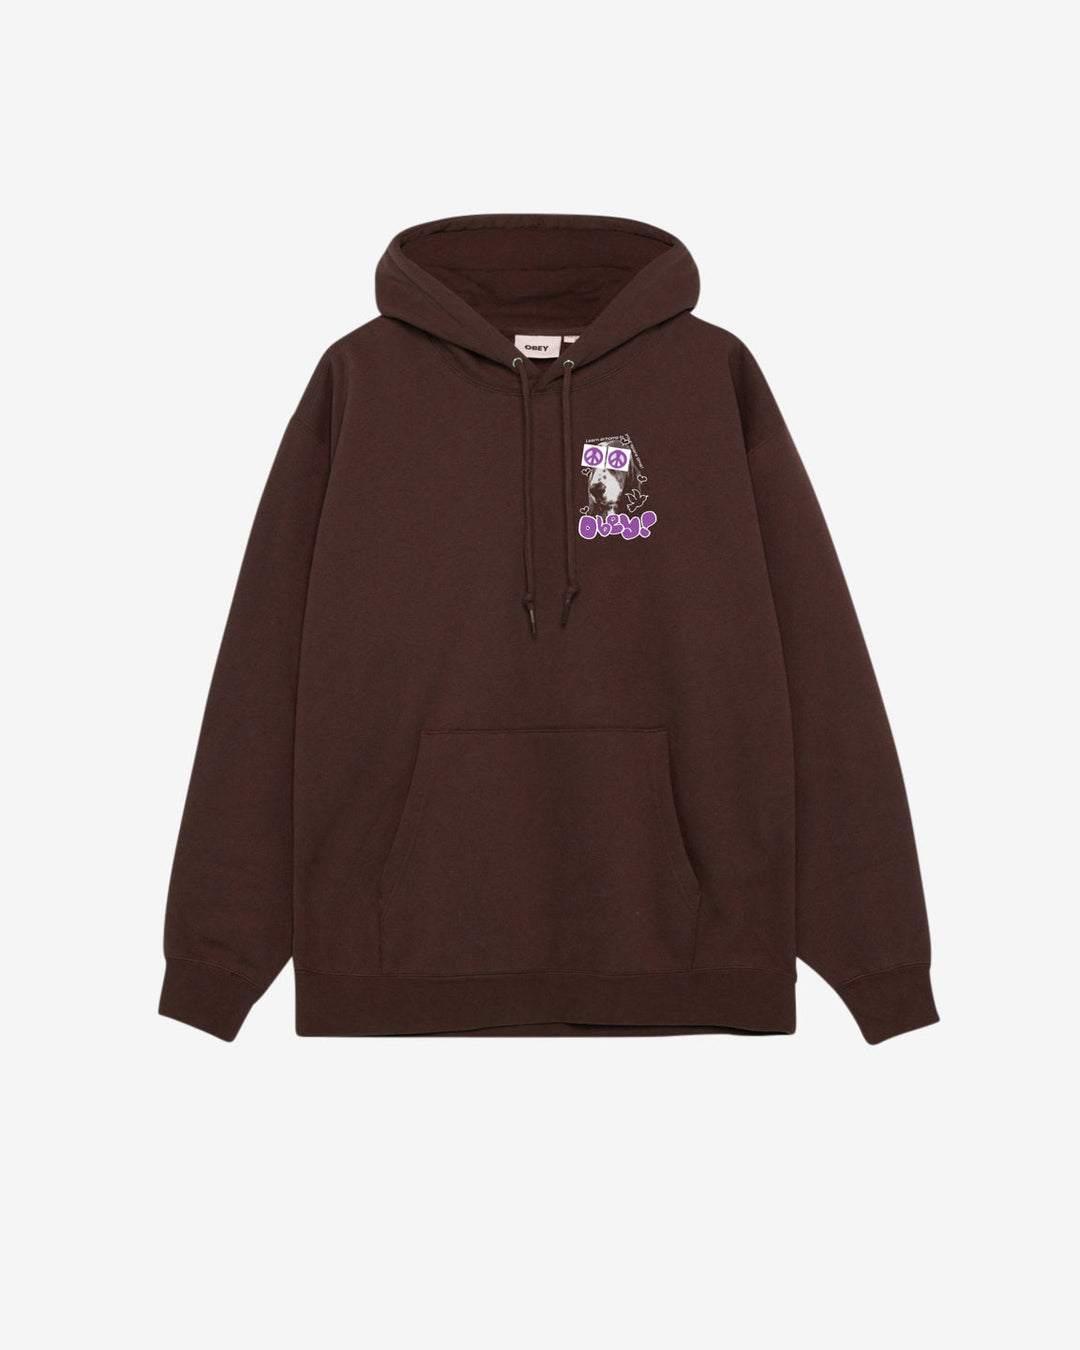 Obey Peace Eyes Heavyweight Pullover - Java Brown - Sun Diego Boardshop